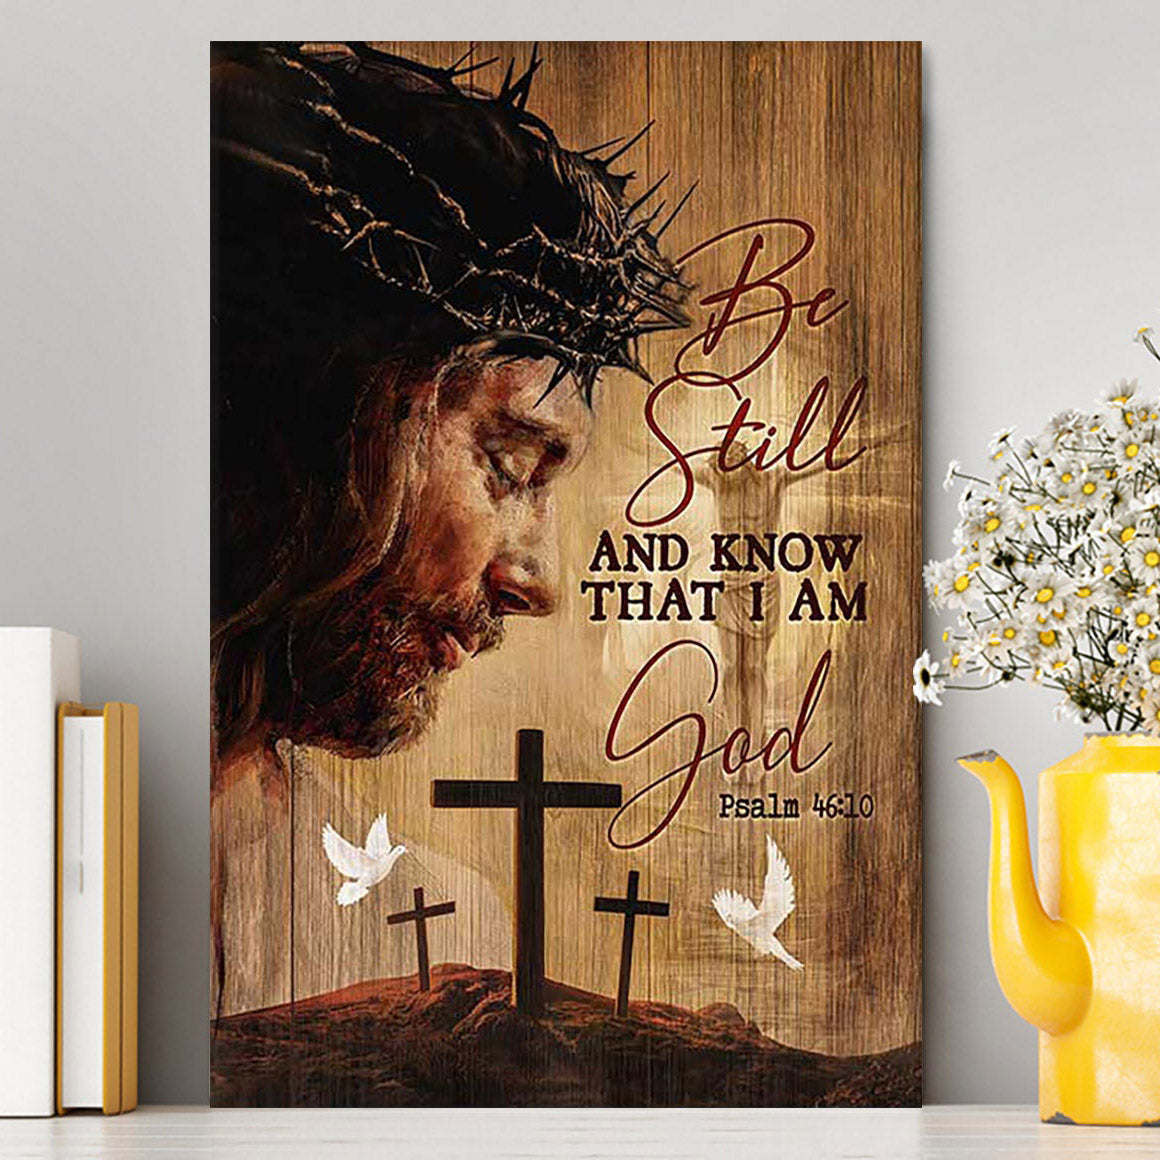 Be Still And Know That I Am God - Jesus Face Stunning Crown White Dove Canvas Art - Bible Verse Wall Art - Christian Inspirational Wall Decor